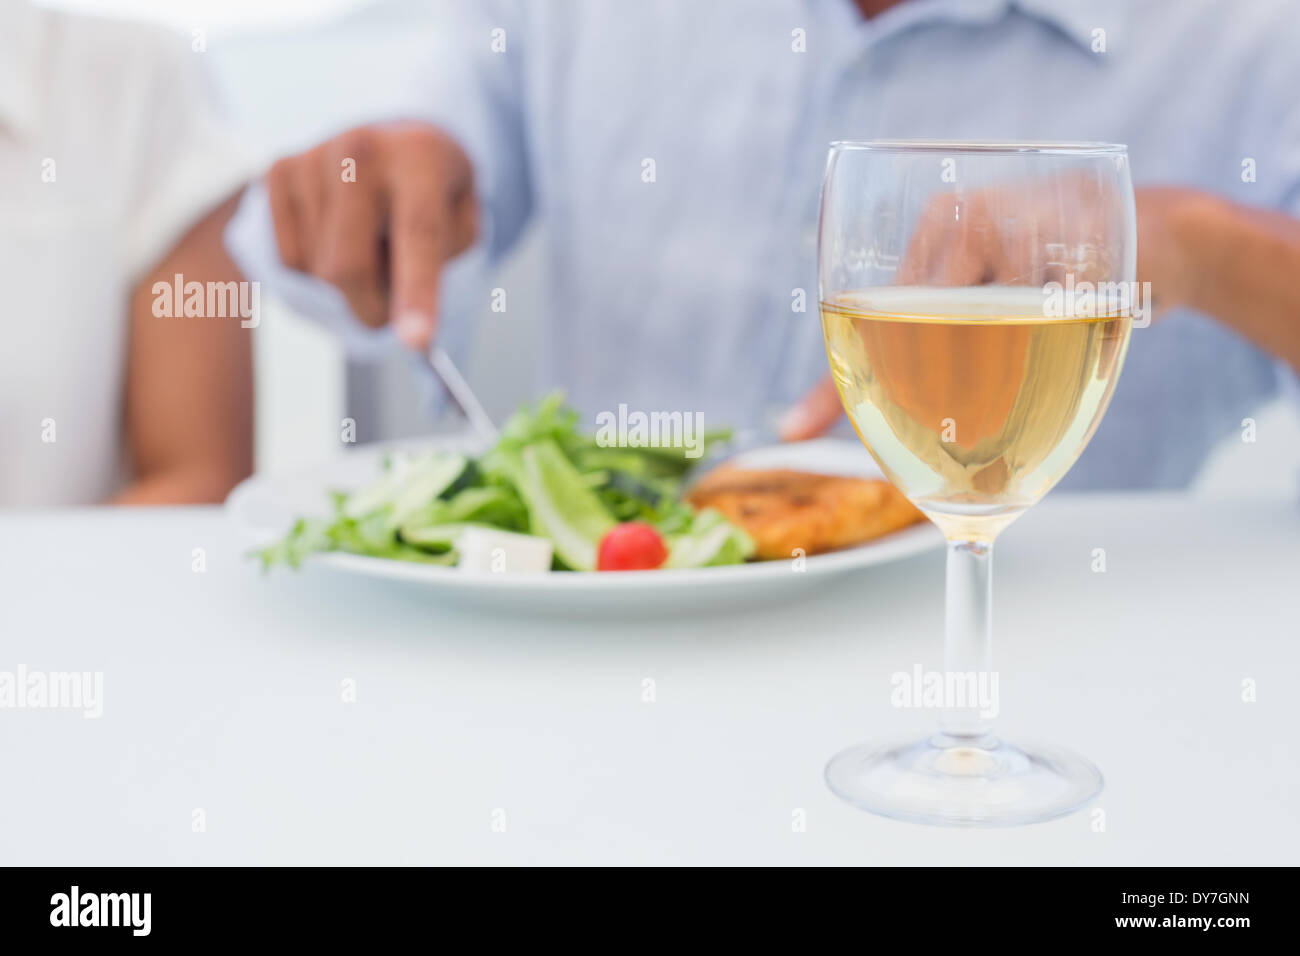 Glass of white wine on a table Stock Photo